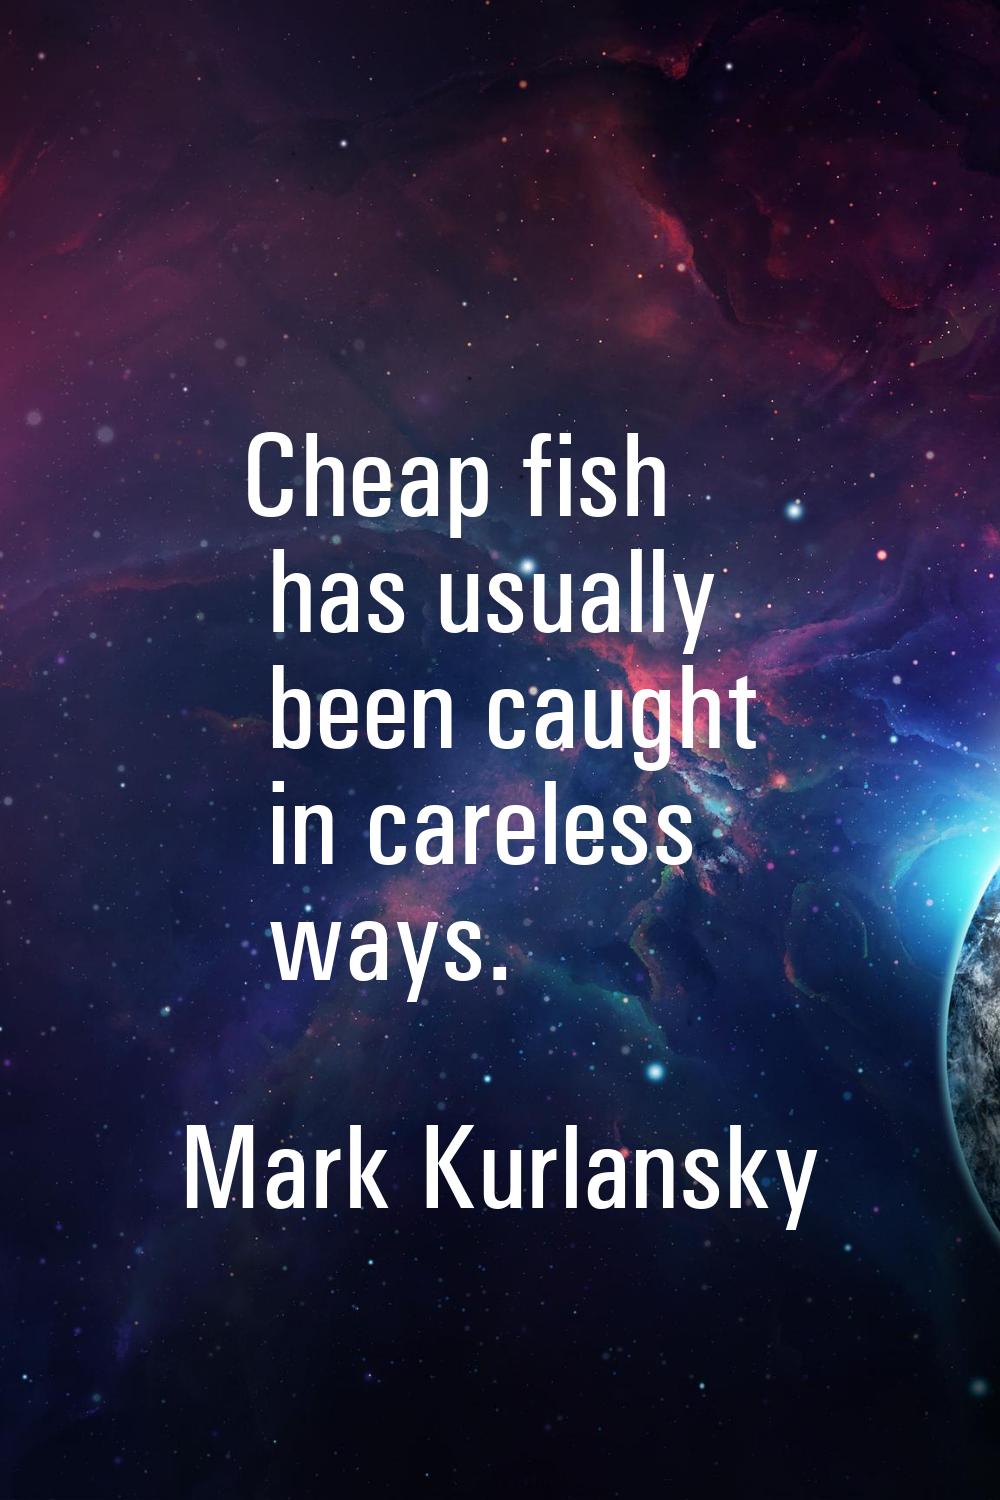 Cheap fish has usually been caught in careless ways.